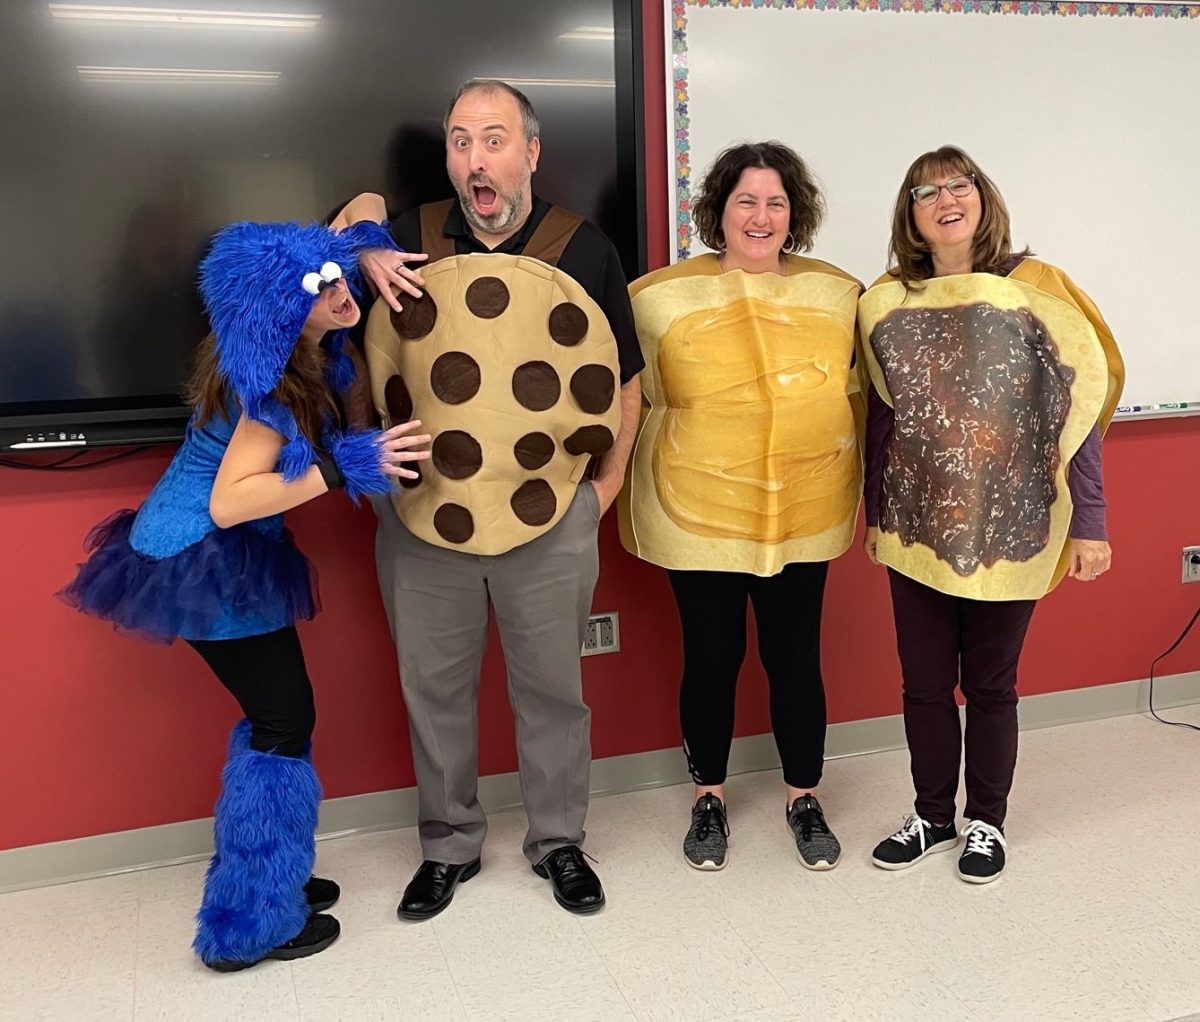 Math+teachers%2C+from+left%2C+Jamie+Lisevick%2C+Ray+Robillard%2C+Nicole+Cowles%2C+and+Laurenn+Bertoglio+pose+as+the+Cookie+Monster%2C+a+chocolate+chip+cookie%2C+and+a+peanut+butter+and+jelly+sandwich+Oct.+17.+It+was+the+second+day+of+fall+spirit+week%2C+Dynamic+Duo+Day.